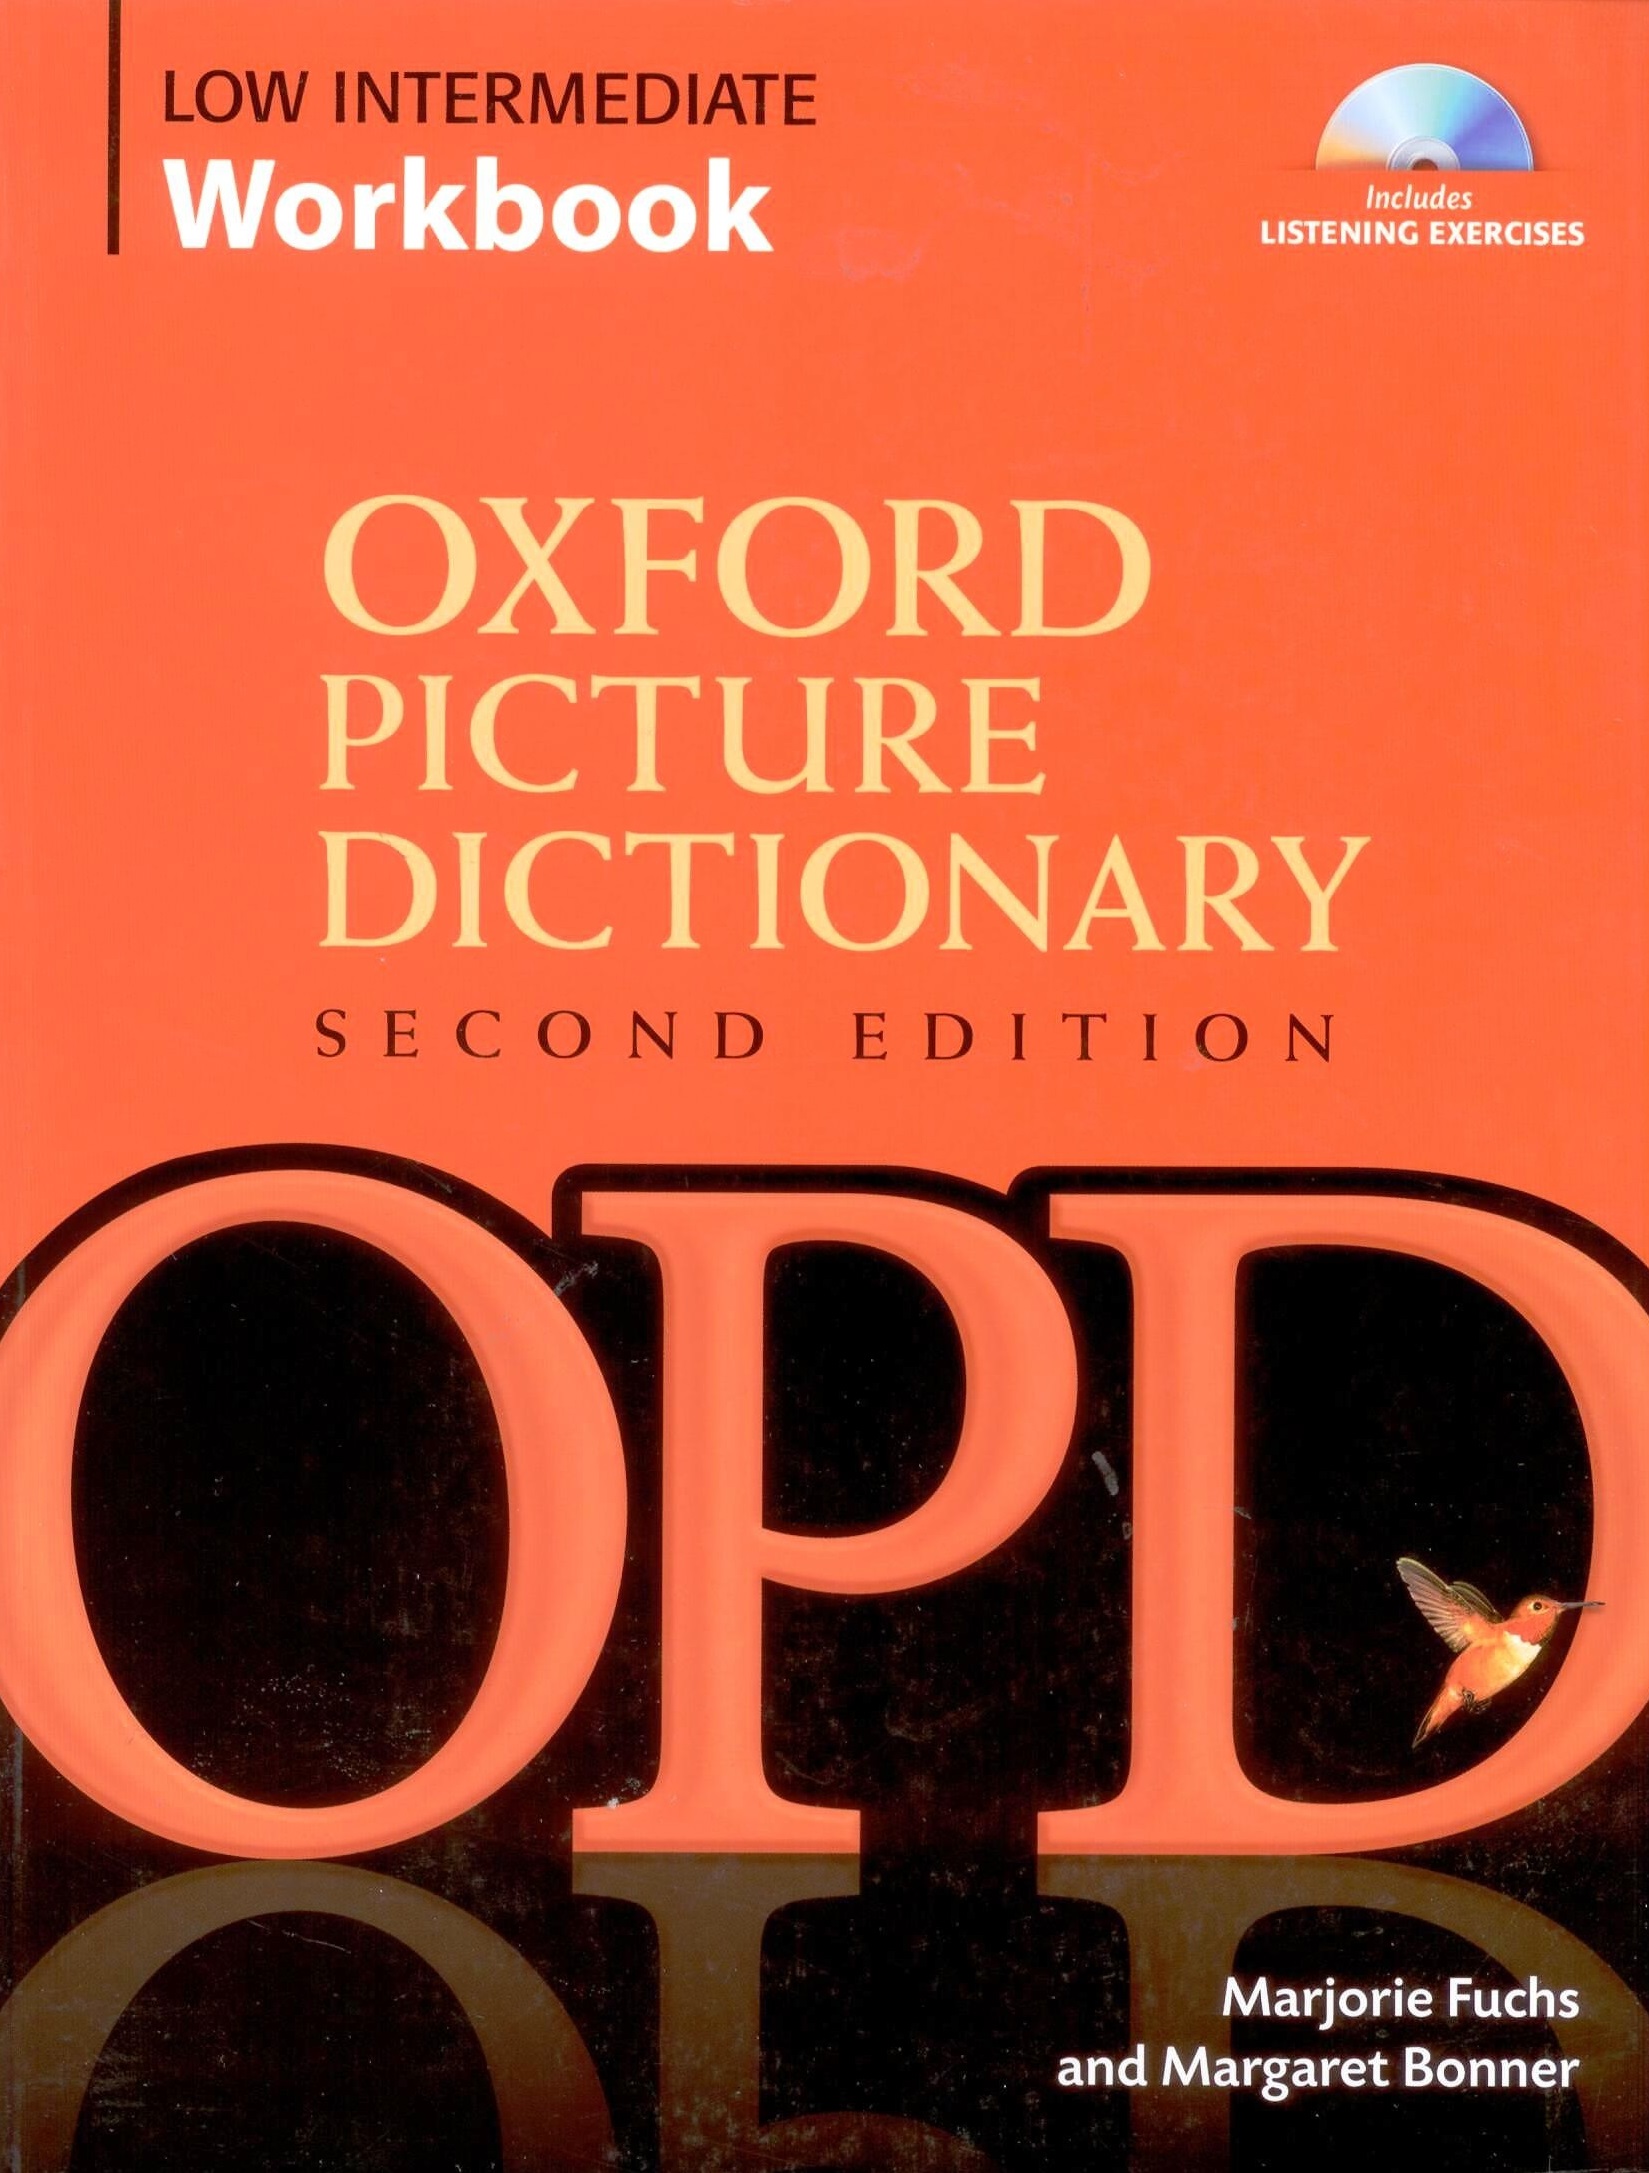 Oxford Picture Dictionary (Second Edition) Low-Intermediate Workbook